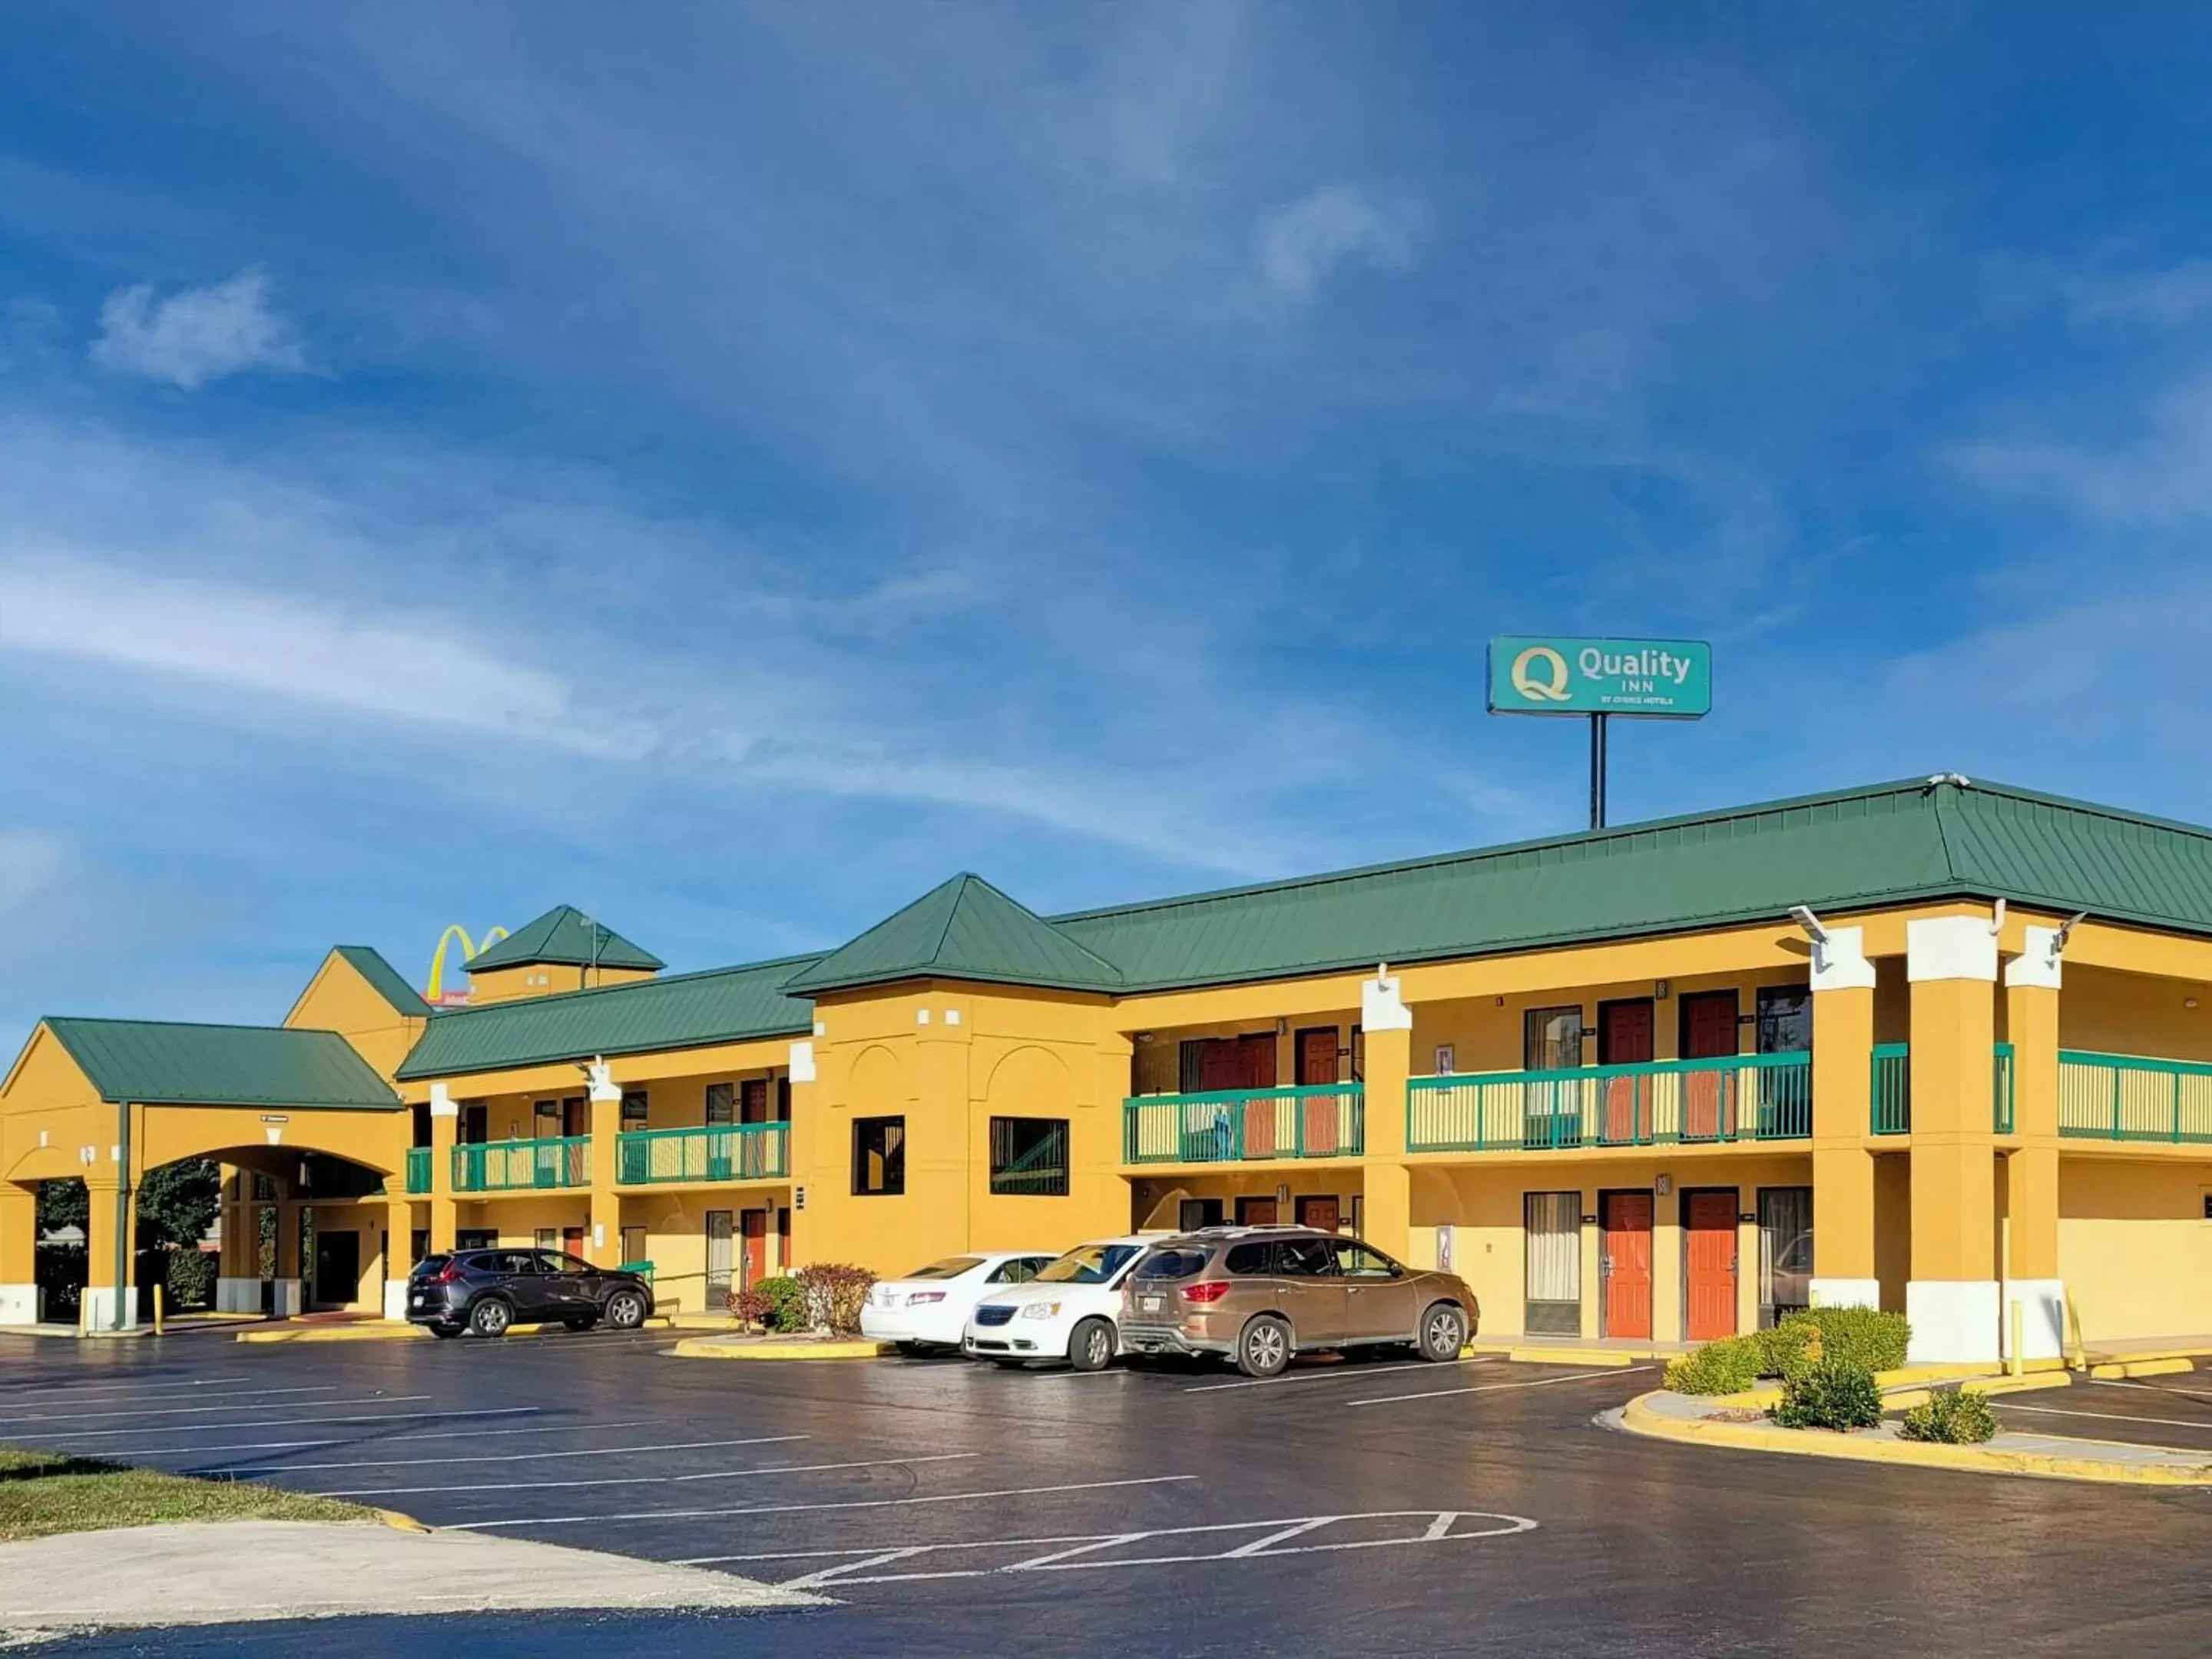 Property Building in Quality Inn Fort Campbell